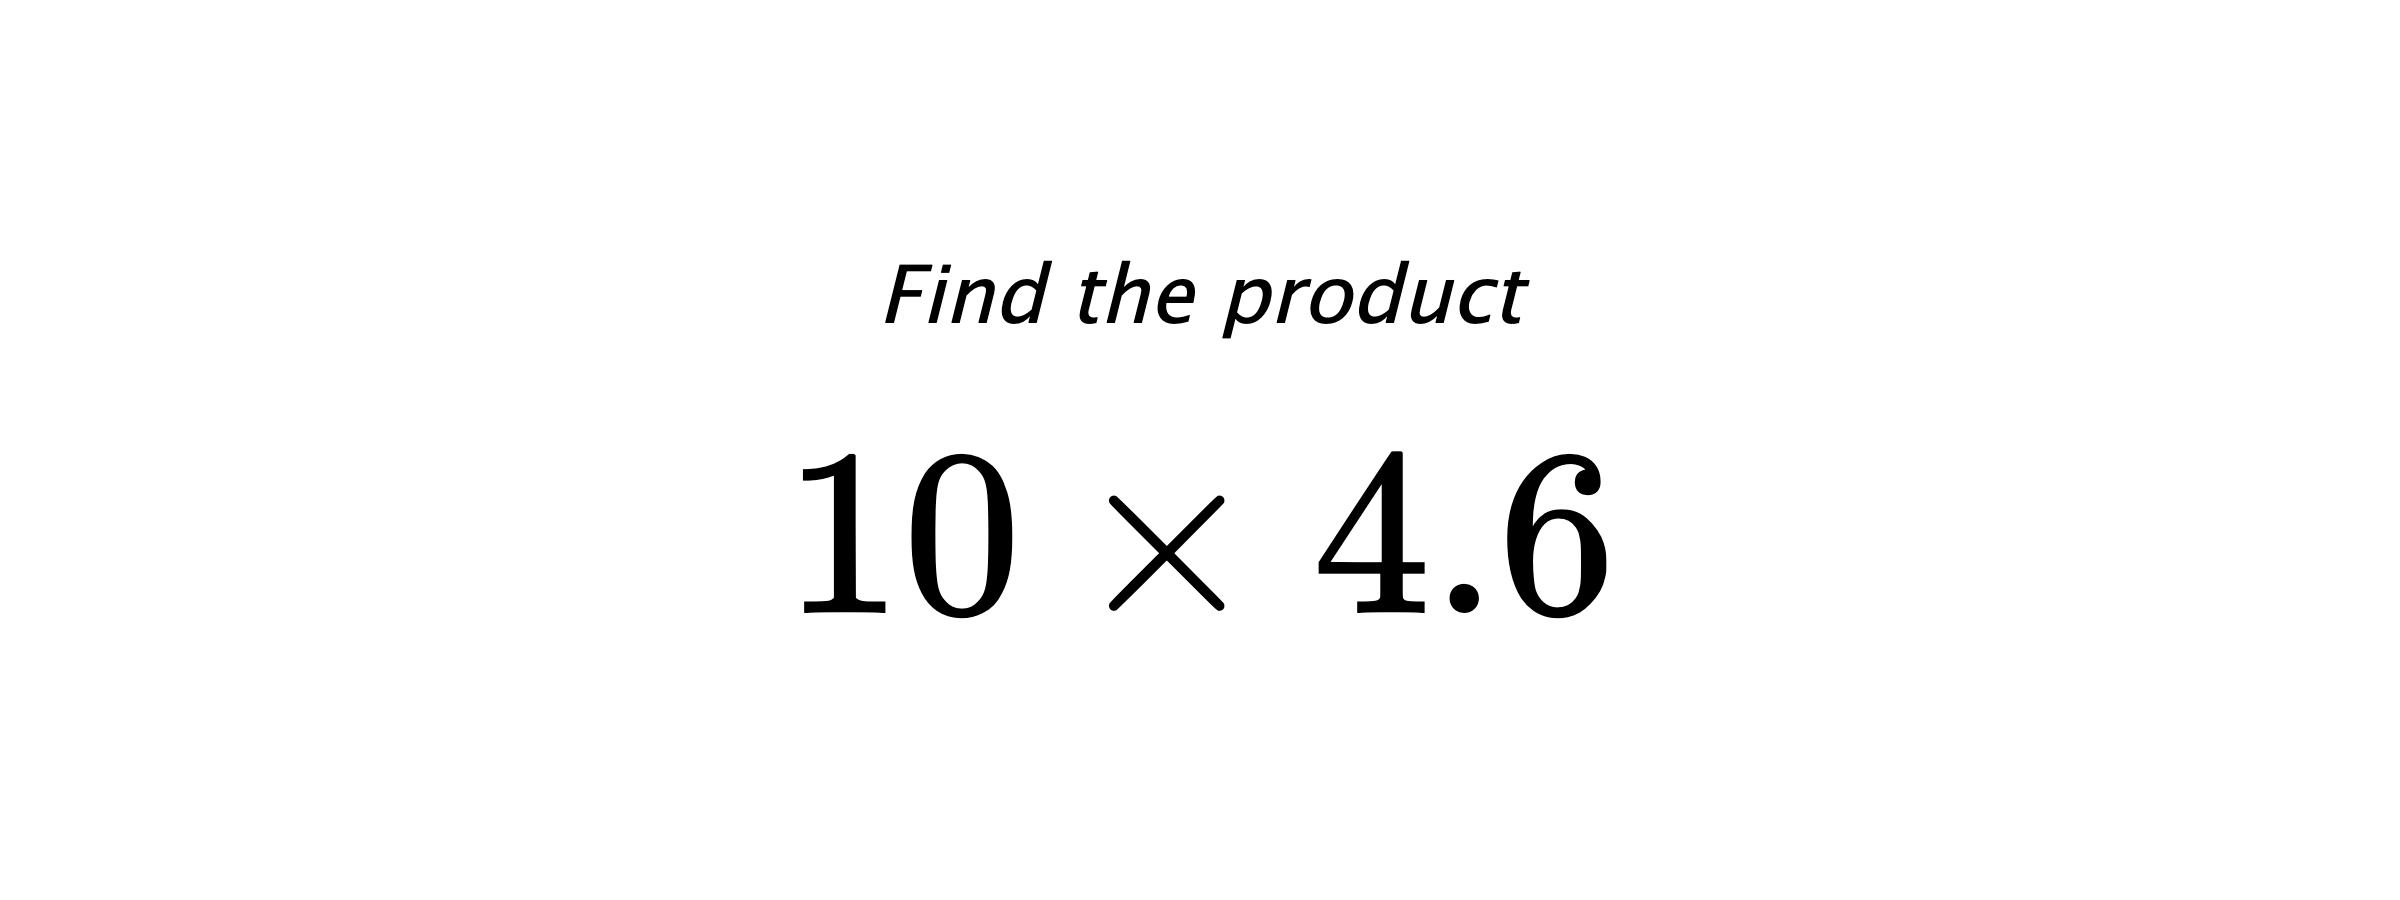 Find the product $ 10 \times 4.6 $